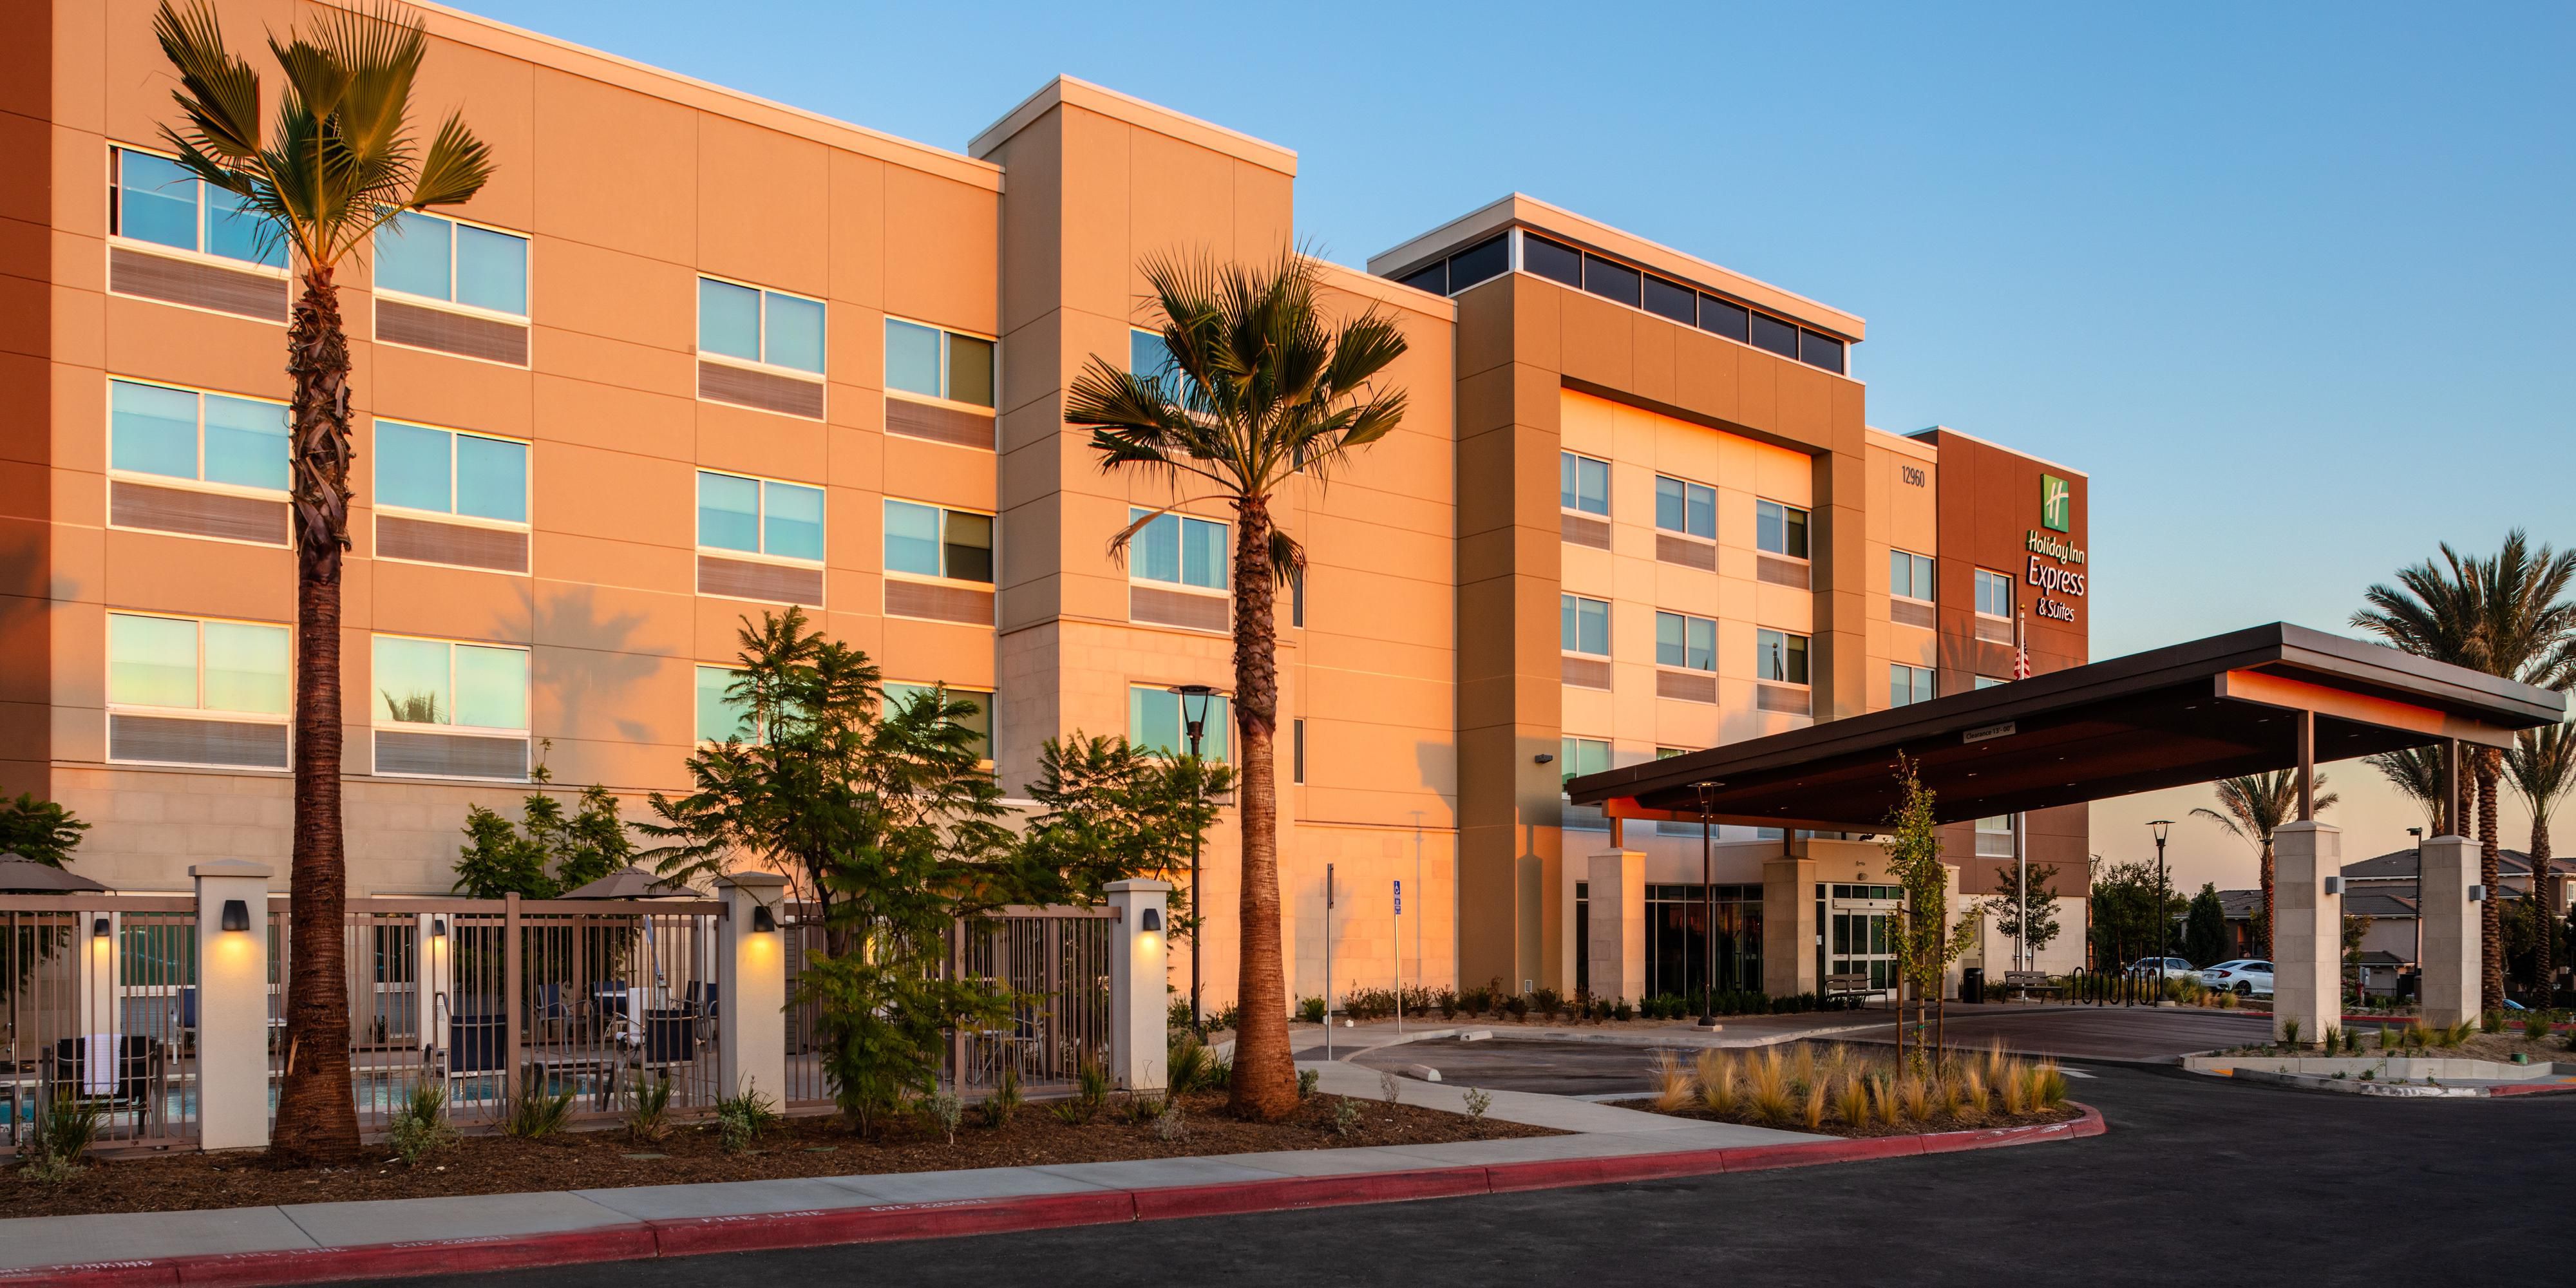 Enjoy a hassle-free stay in the Riverside CA area with complimentary onsite parking at our hotel. Our Moreno Valley hotel is just 30 minutes away from Ontario International Airport. Easily get to destinations like Lake Perris, Indian Hills Golf Club, and Box Springs Mountain Reserve nearby.